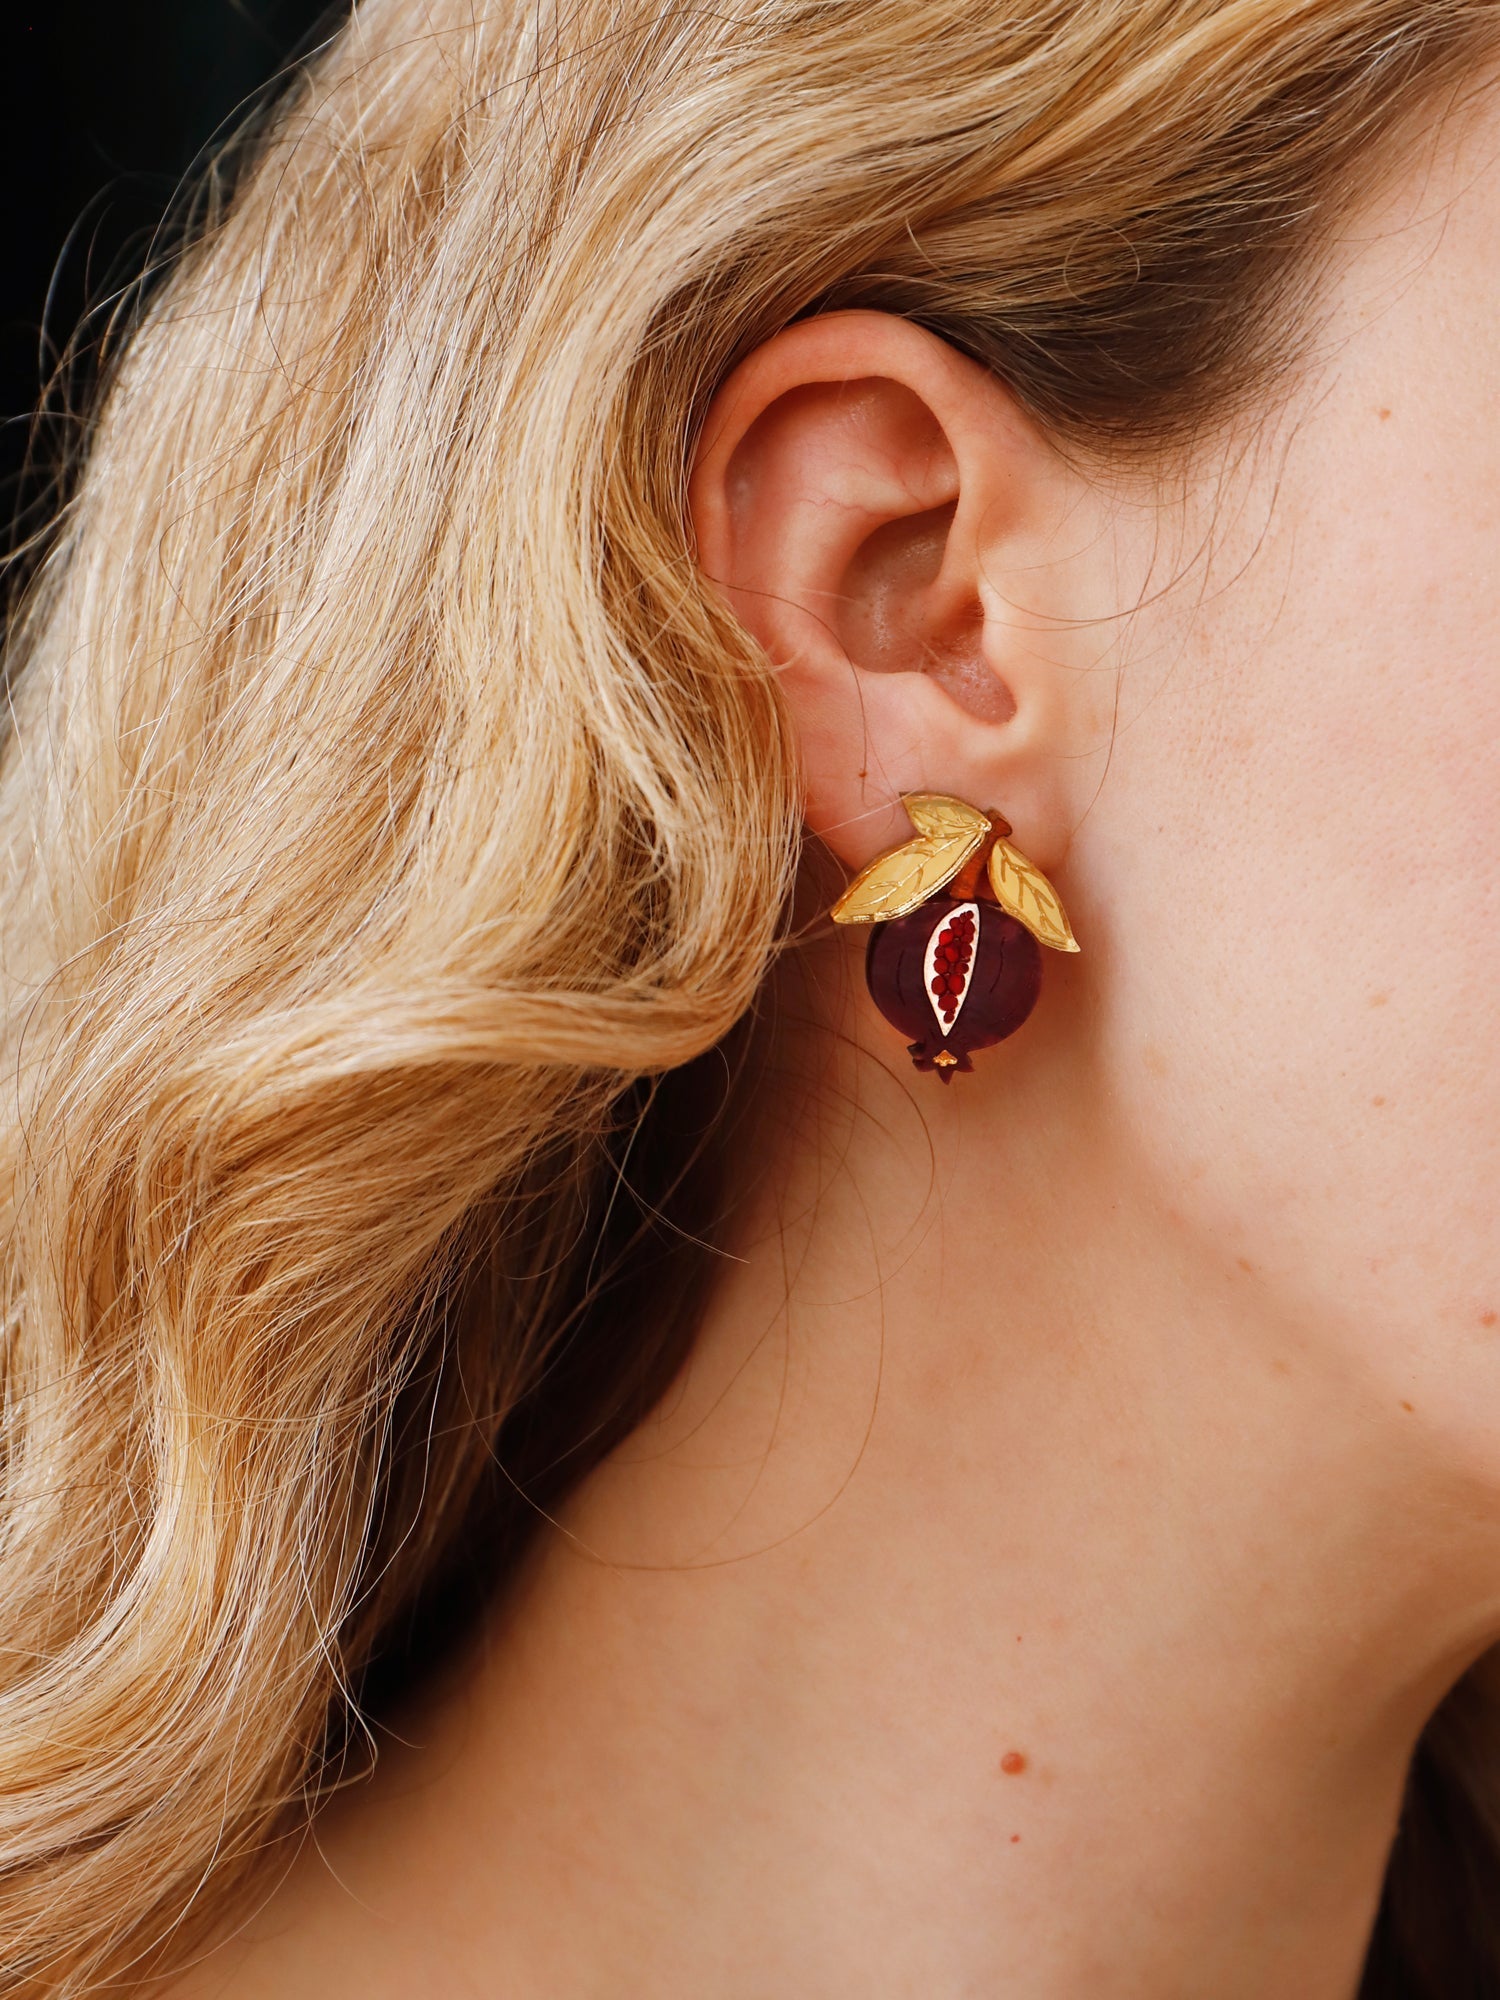 Pomegranate stud clip-on earrings made with wood, acrylic and hand-inked details. Handmade in the UK by Wolf & Moon.